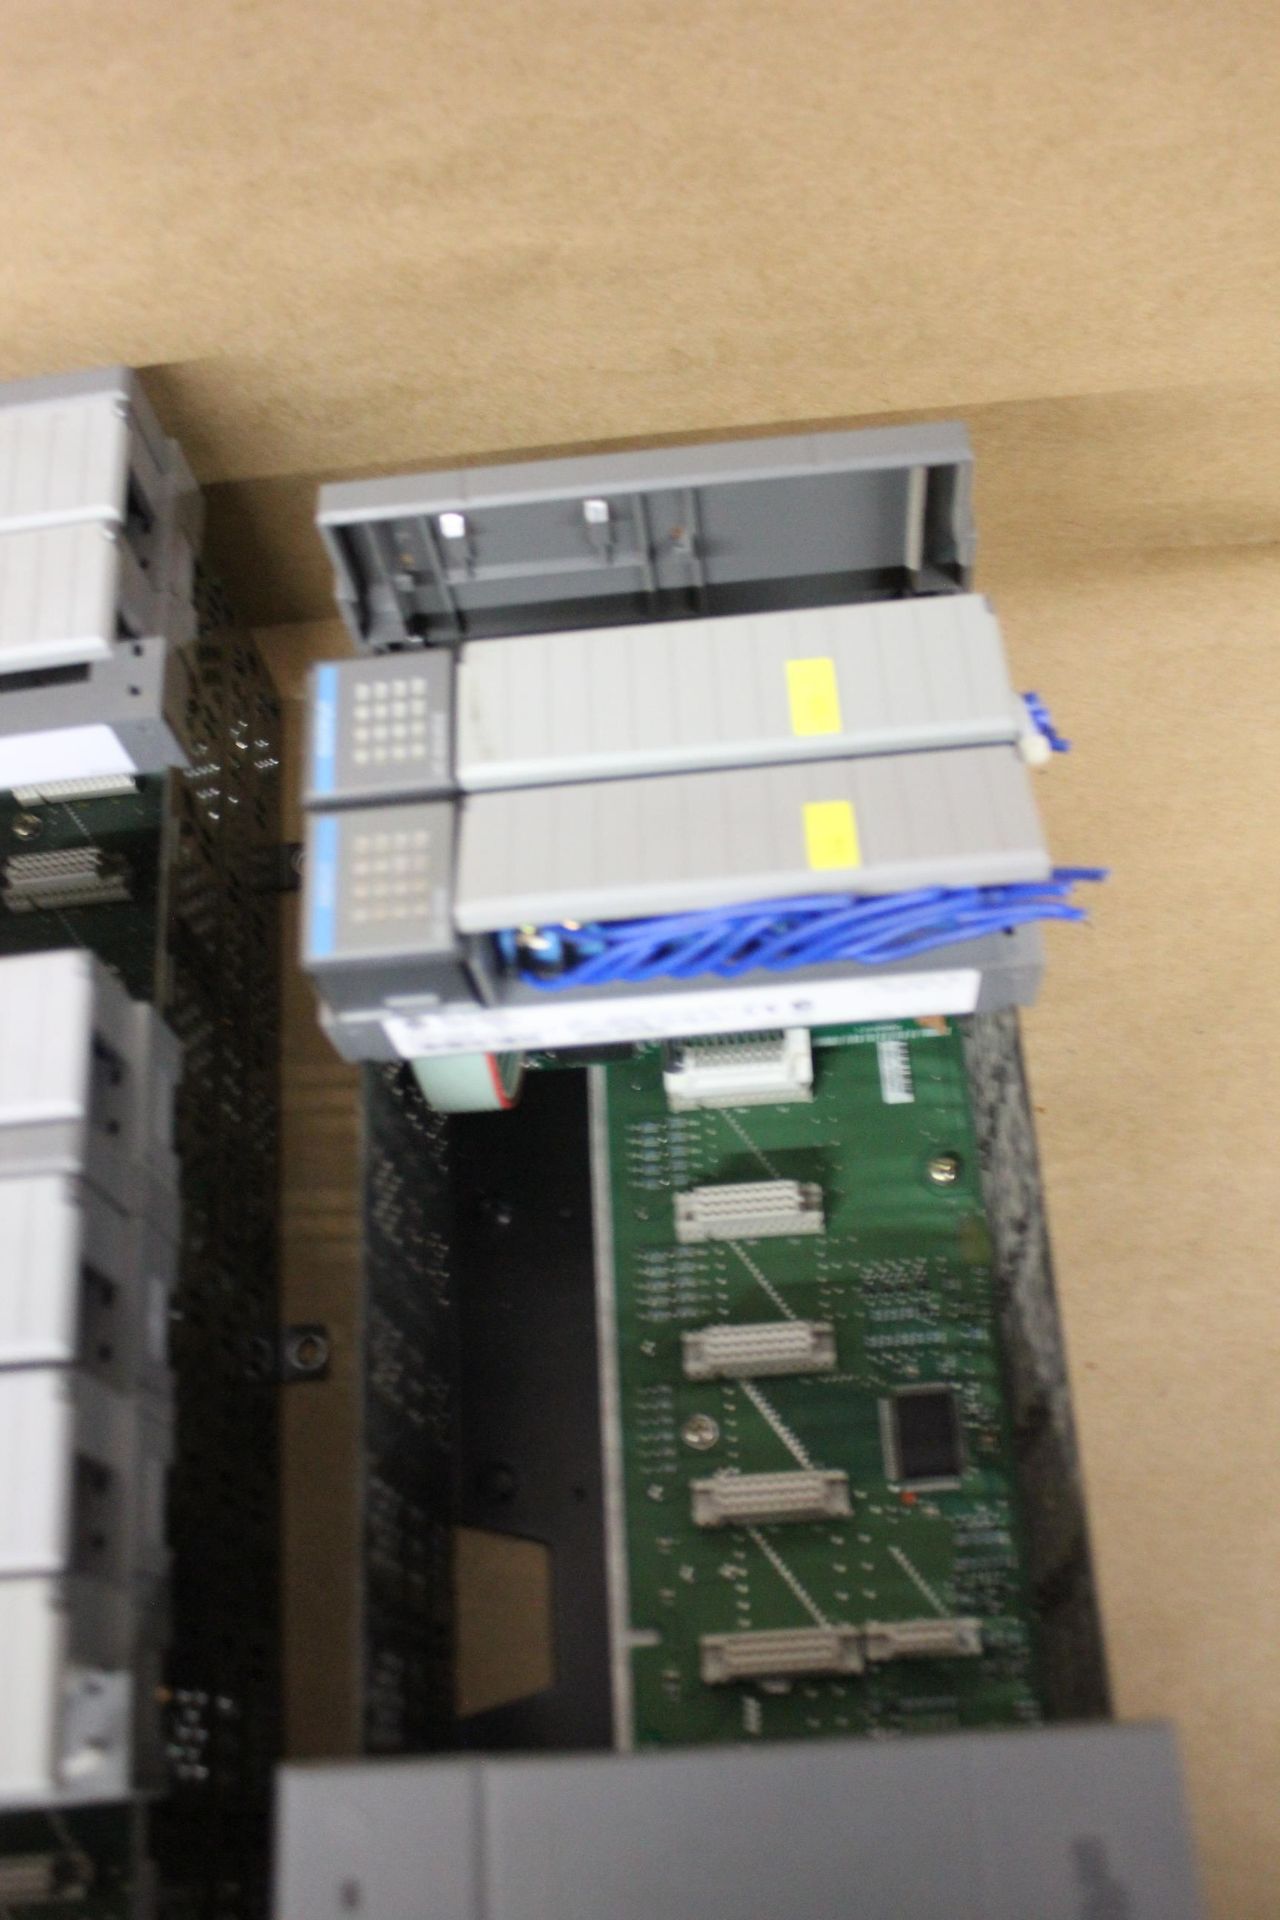 LOT OF ALLEN BRADLEY PLC RACKS WITH POWER AND I/O MODULES - Image 3 of 12